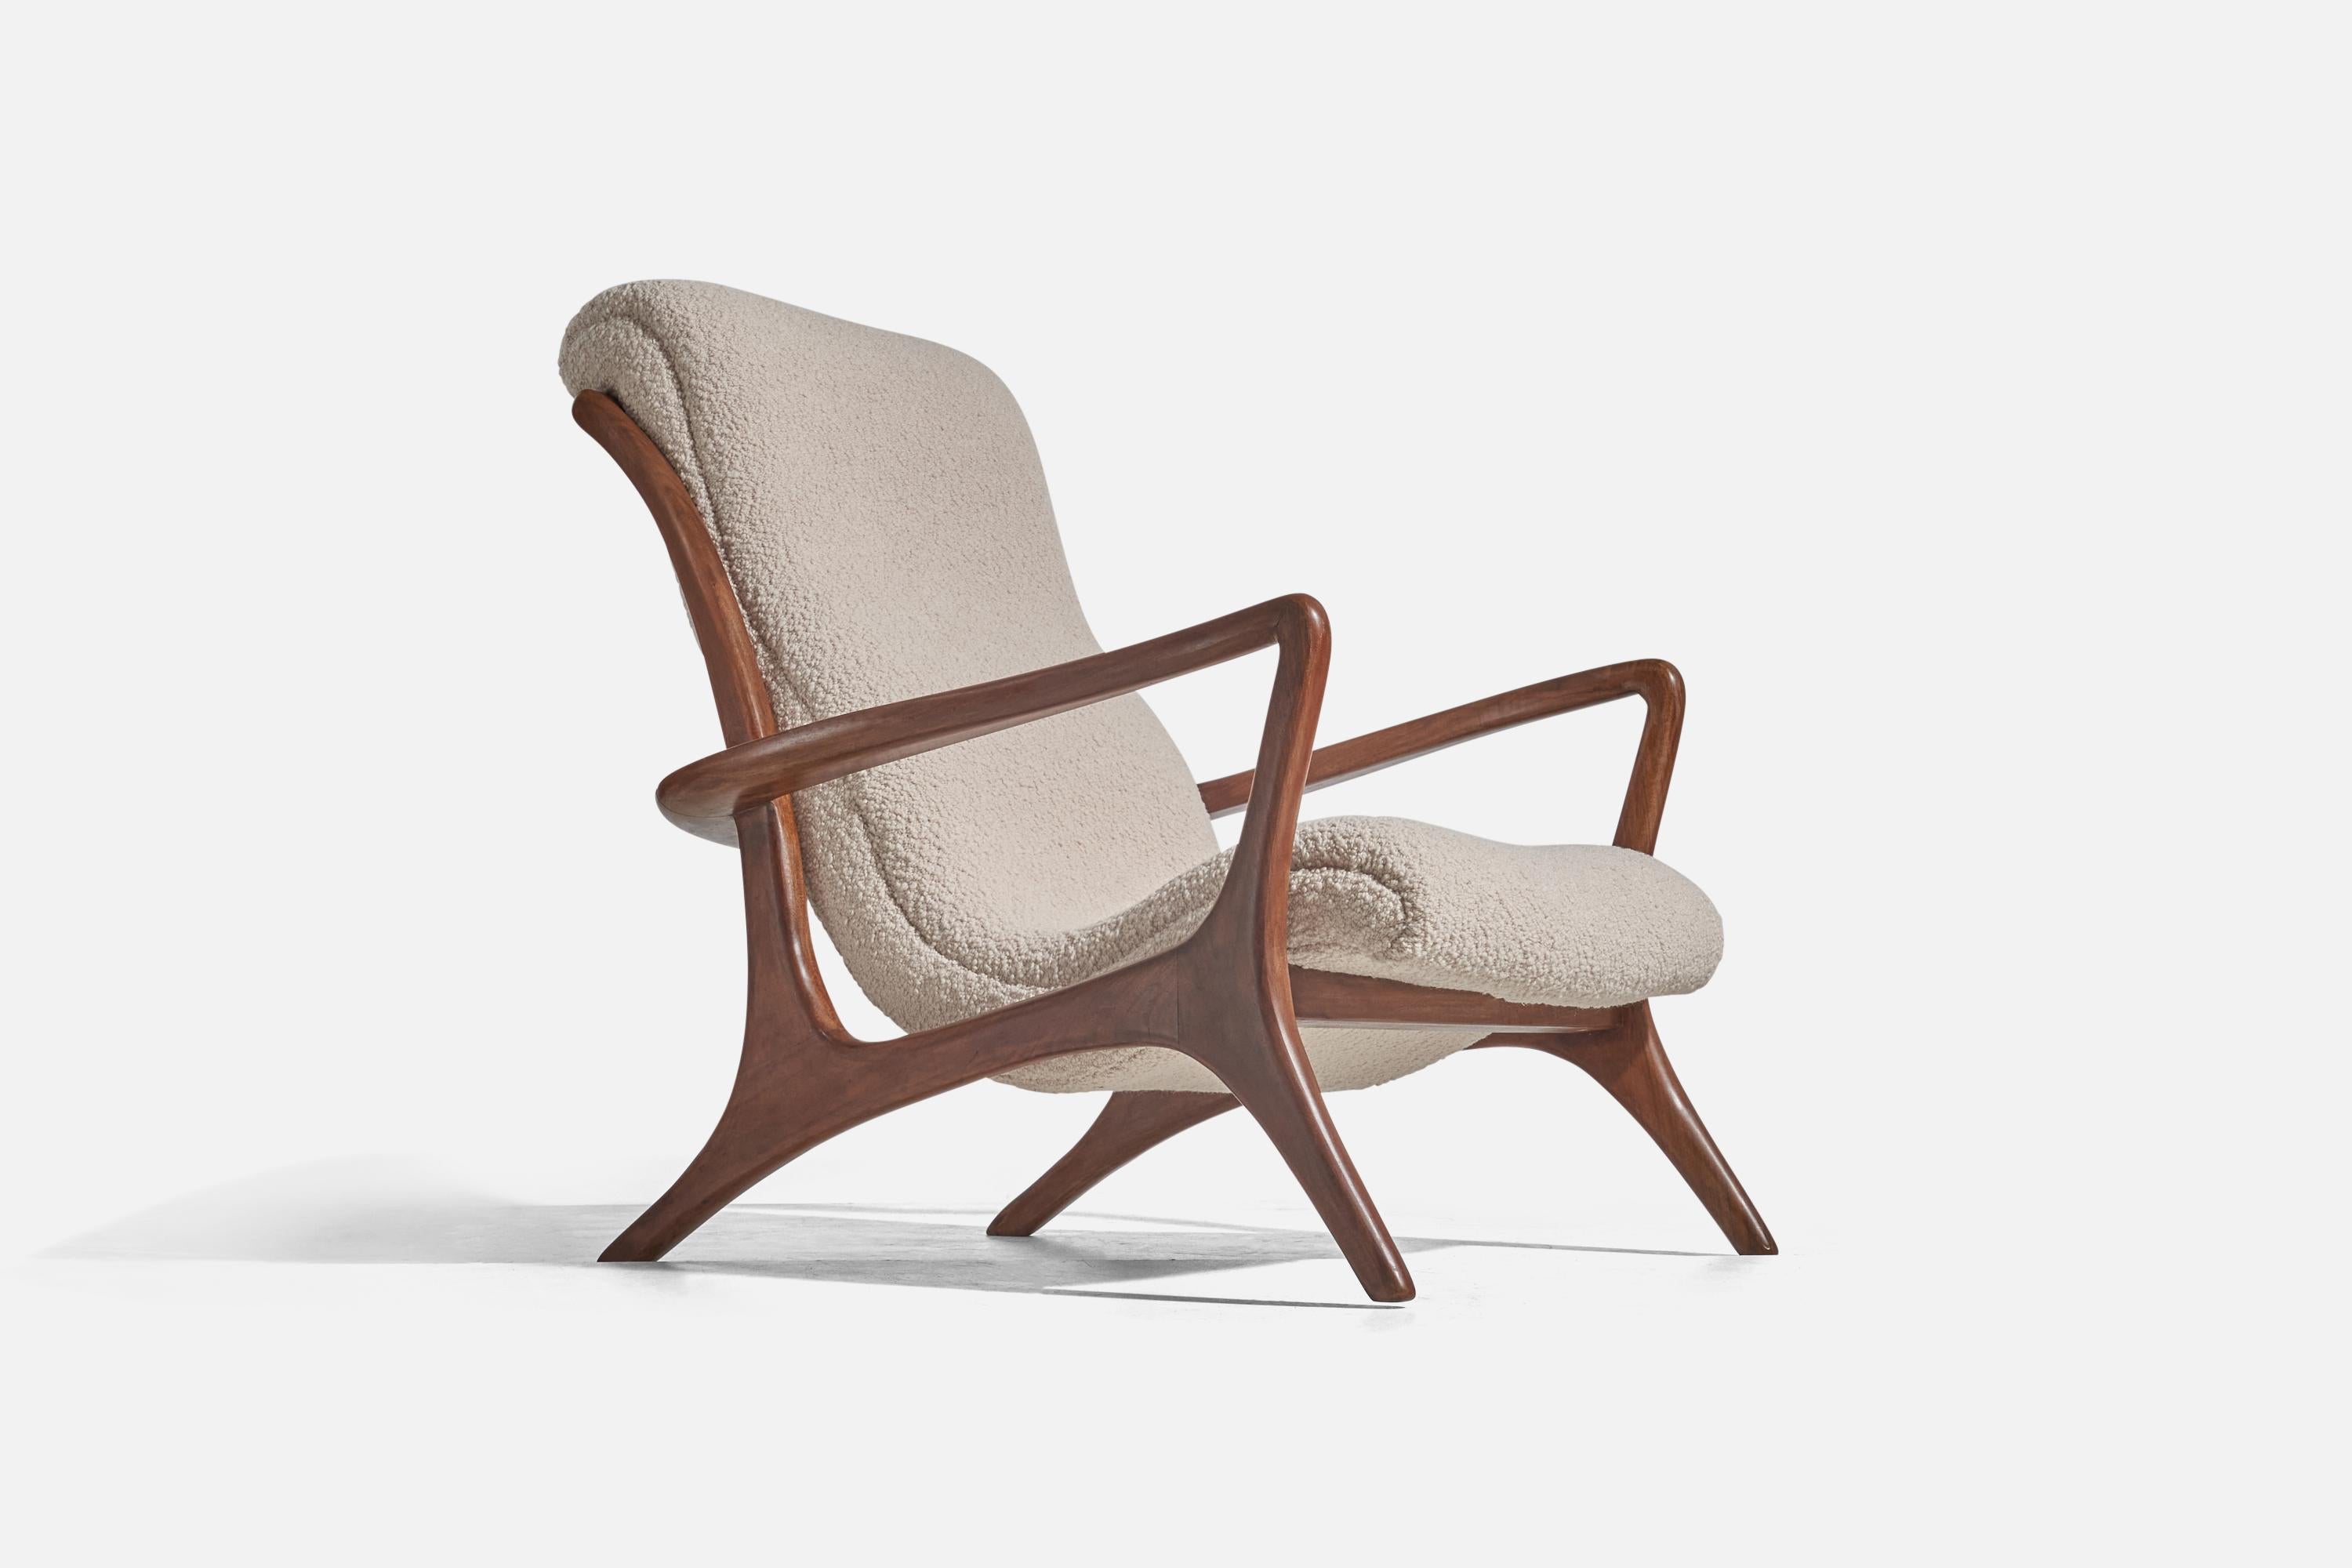 A rare lounge lounge chair designed by Vladimir Kagan for his own firm Vladimir Kagans Design. Designed c. 1950s, this example produced c. 1970.

Features finely carved walnut, reupholstered in a brand-new high-end bouclé fabric.

